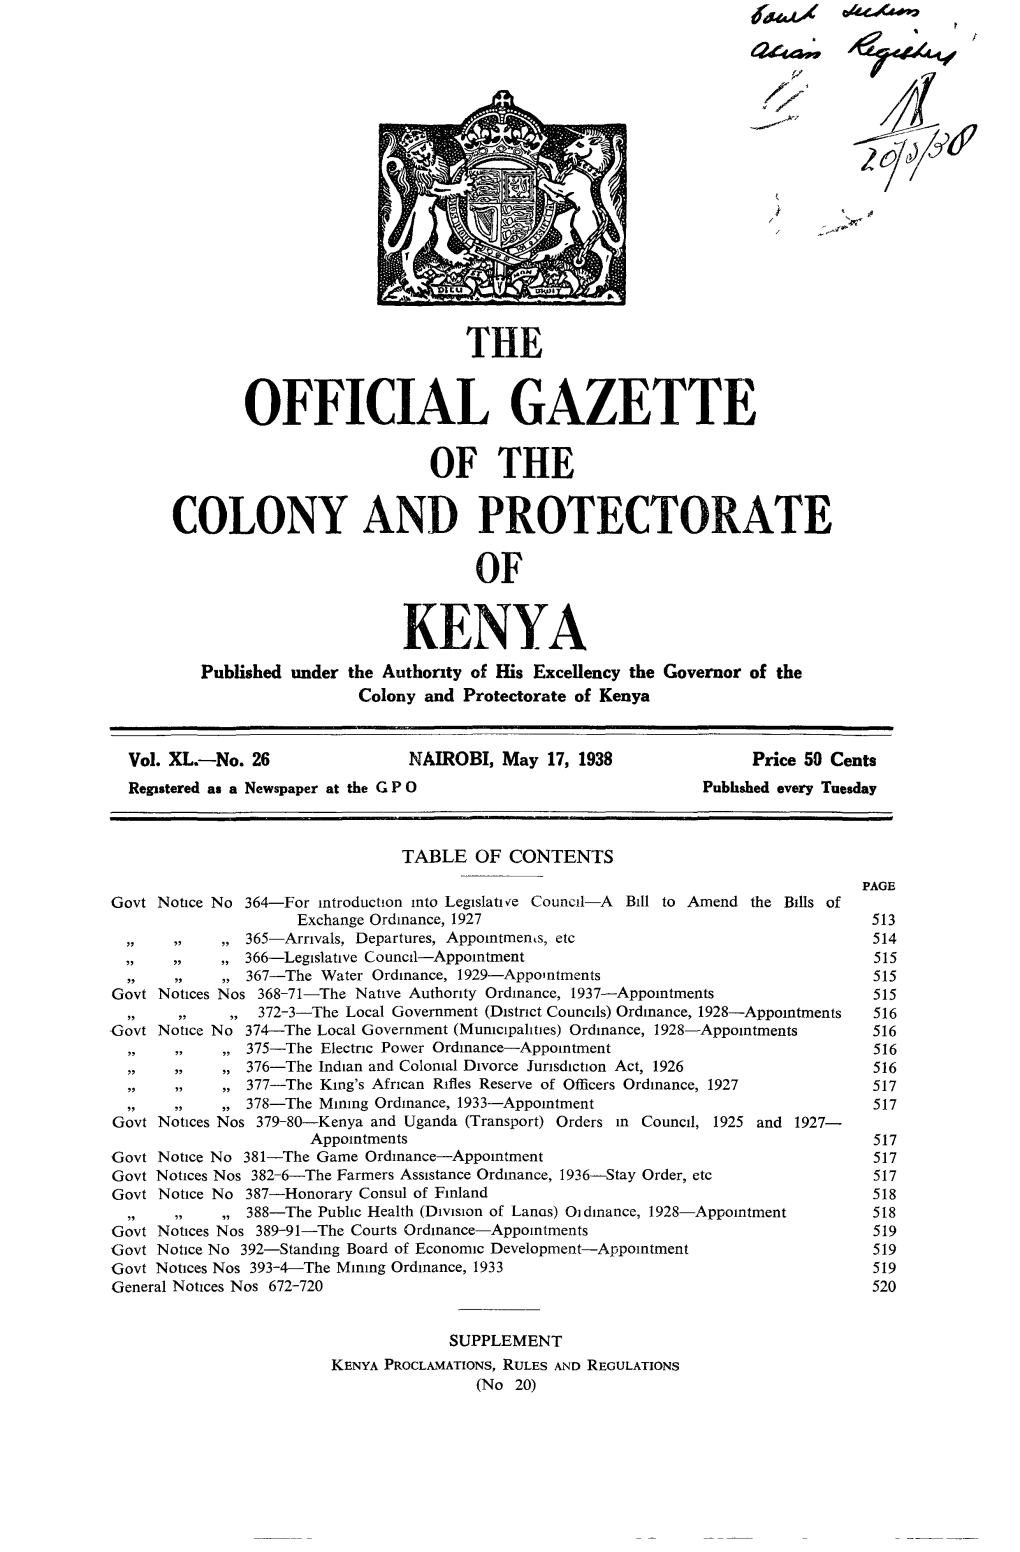 OFFICIAL GAZETTE of the COLONY and PROTECTORATE KENYA Published Under the Author~Tyof His Excellency the Governor of the Colony and Protectorate of Kenya